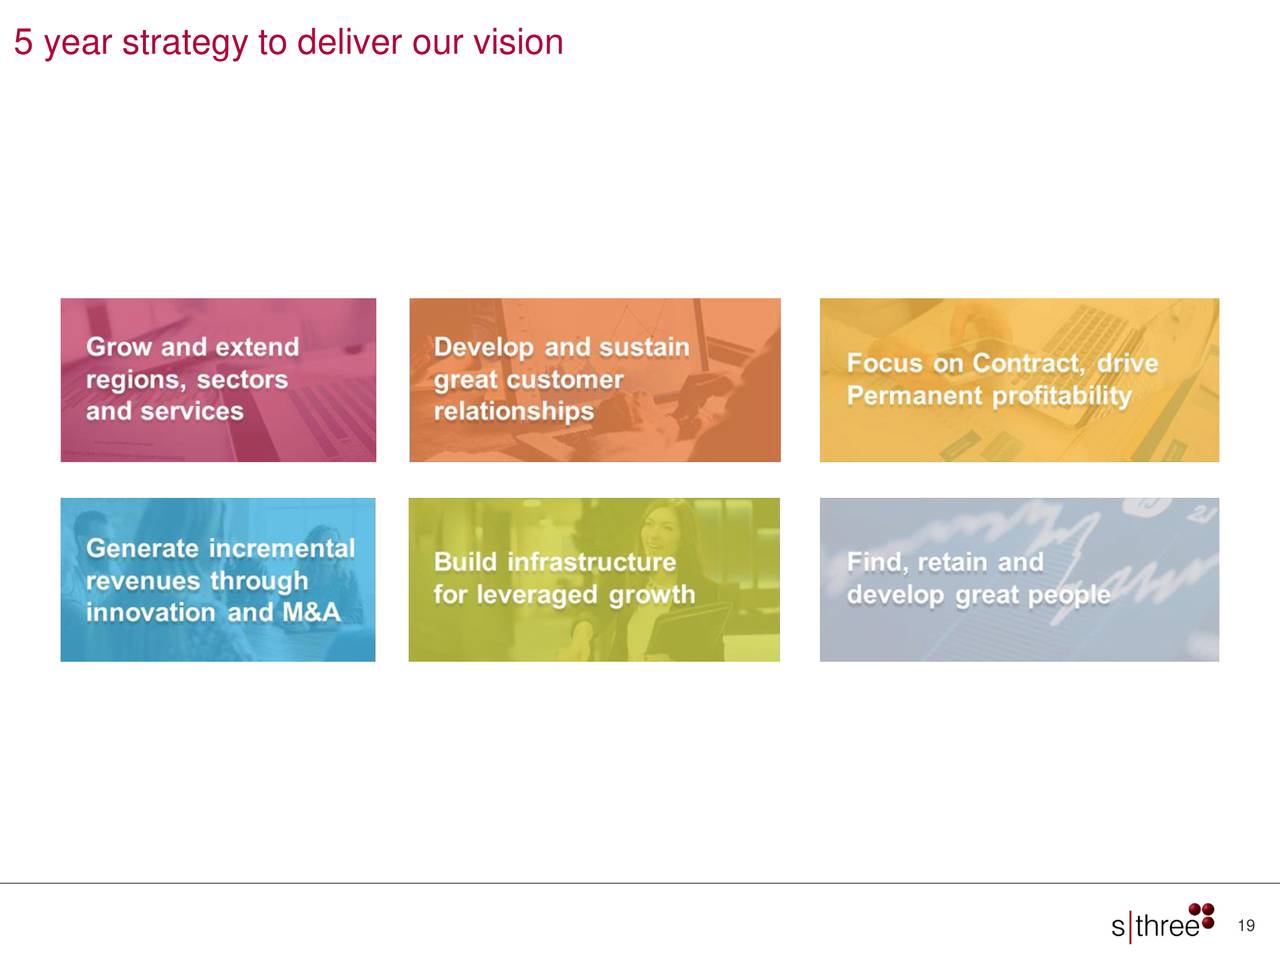 5 year strategy to deliver our vision